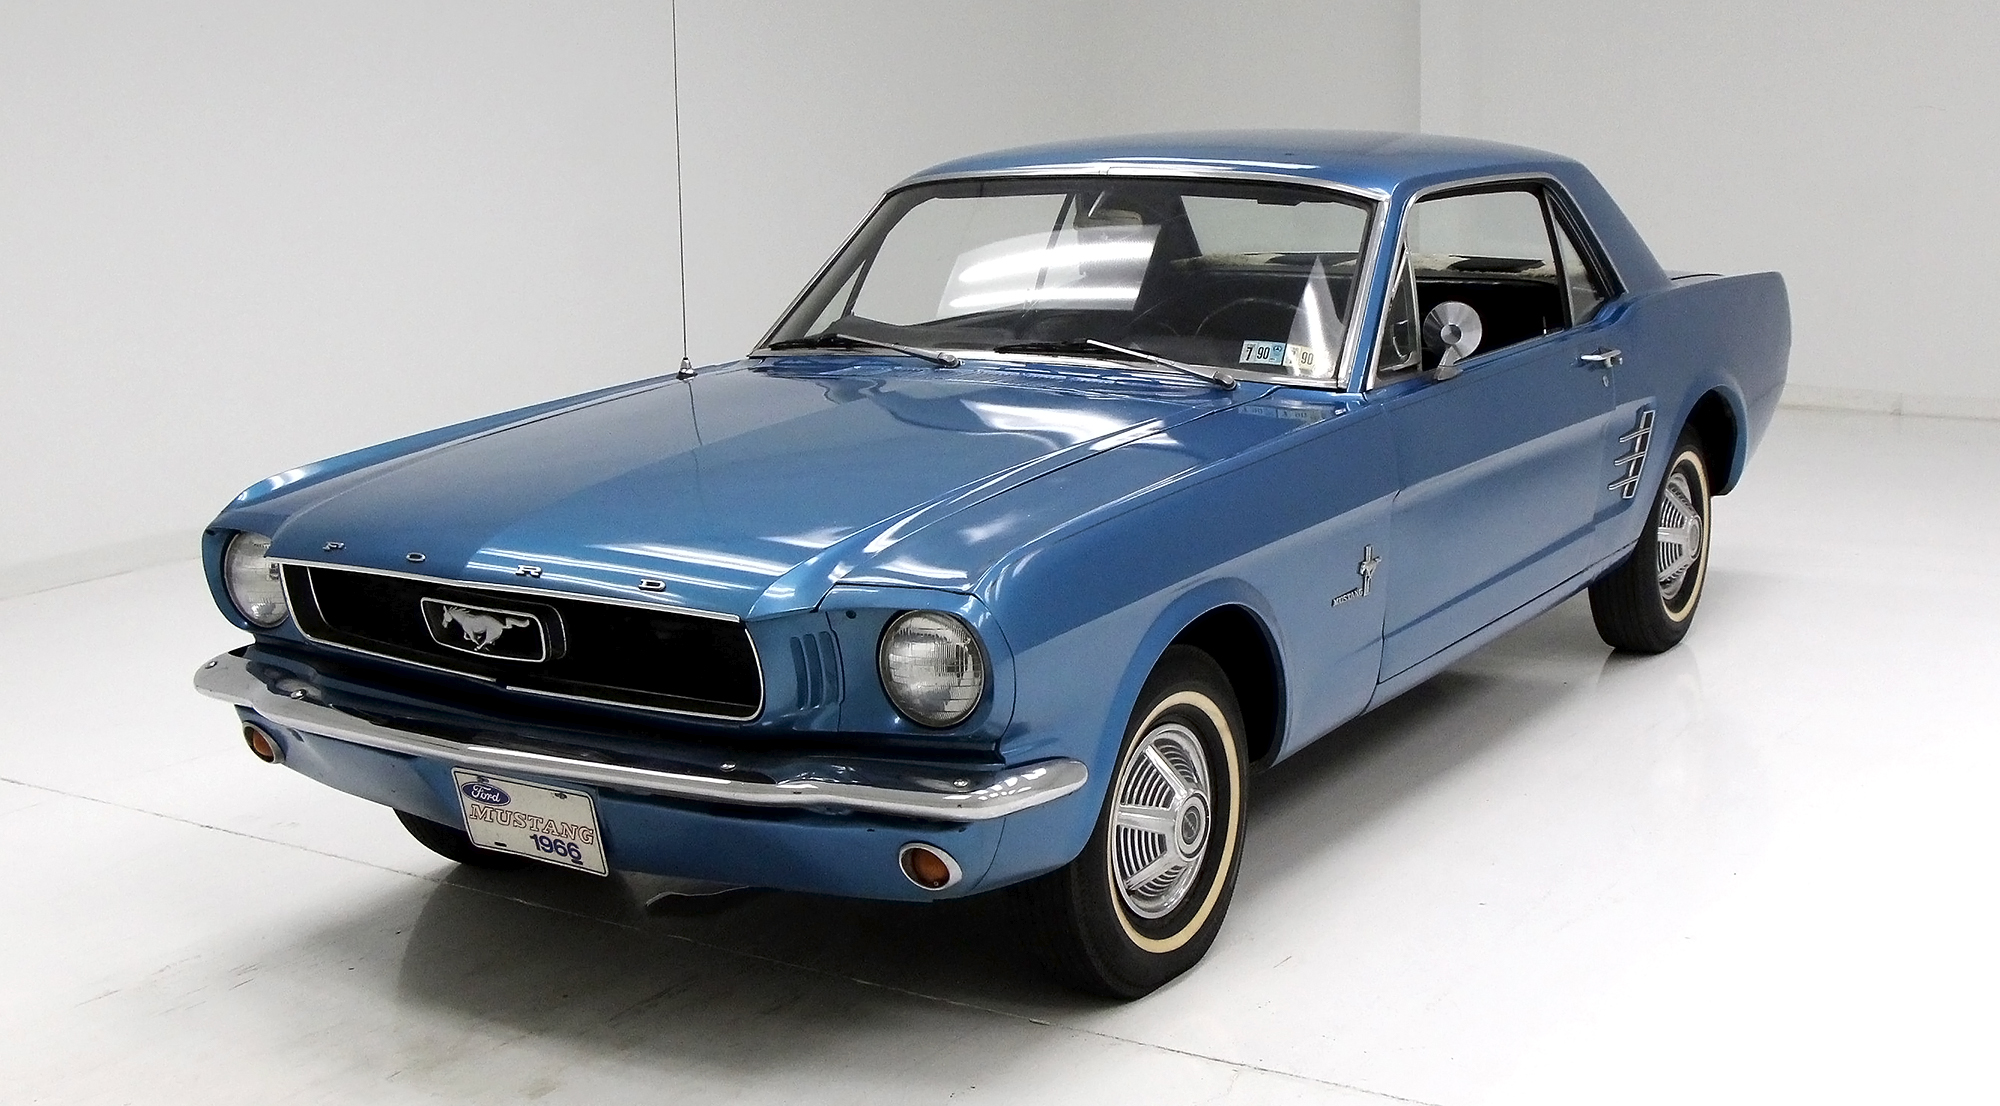 How Much is a 1966 Ford Mustang Worth